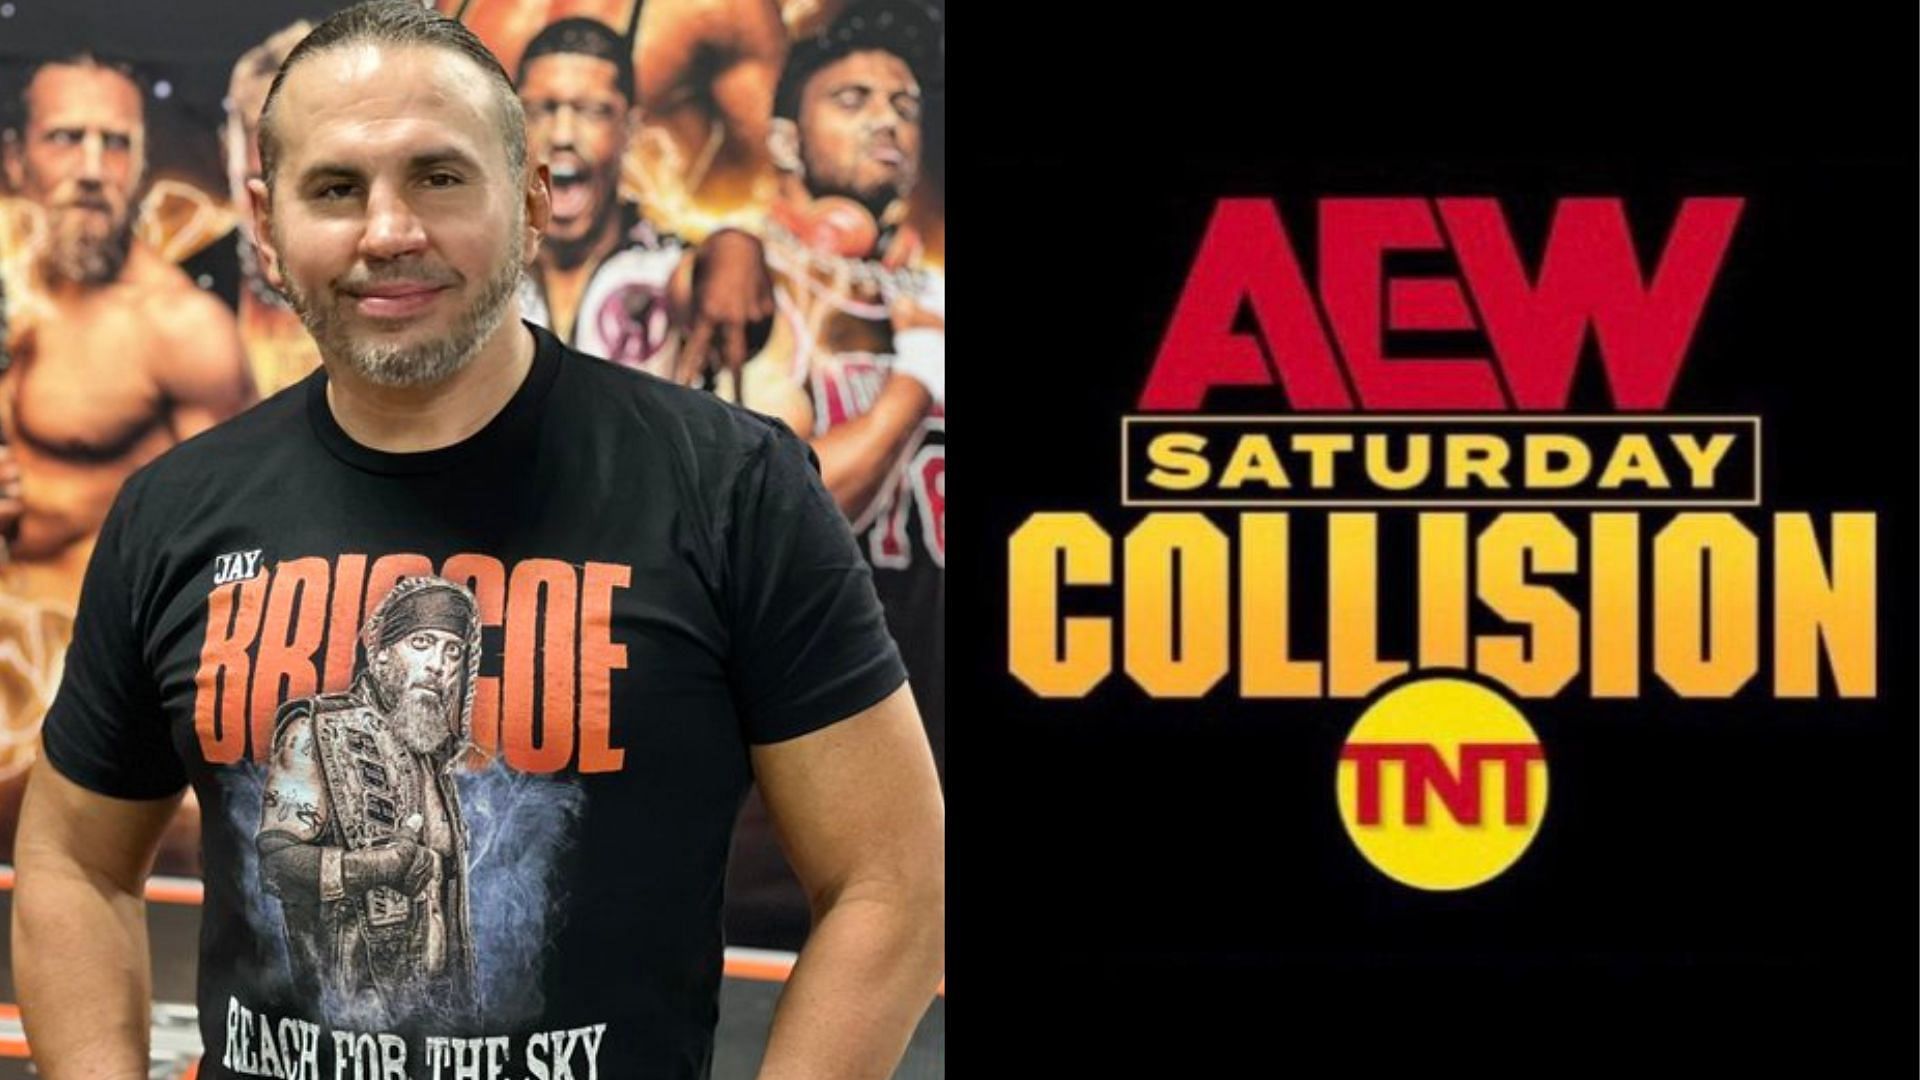 Matt Hardy is one of the wrestlers supposedly barred from AEW Collision